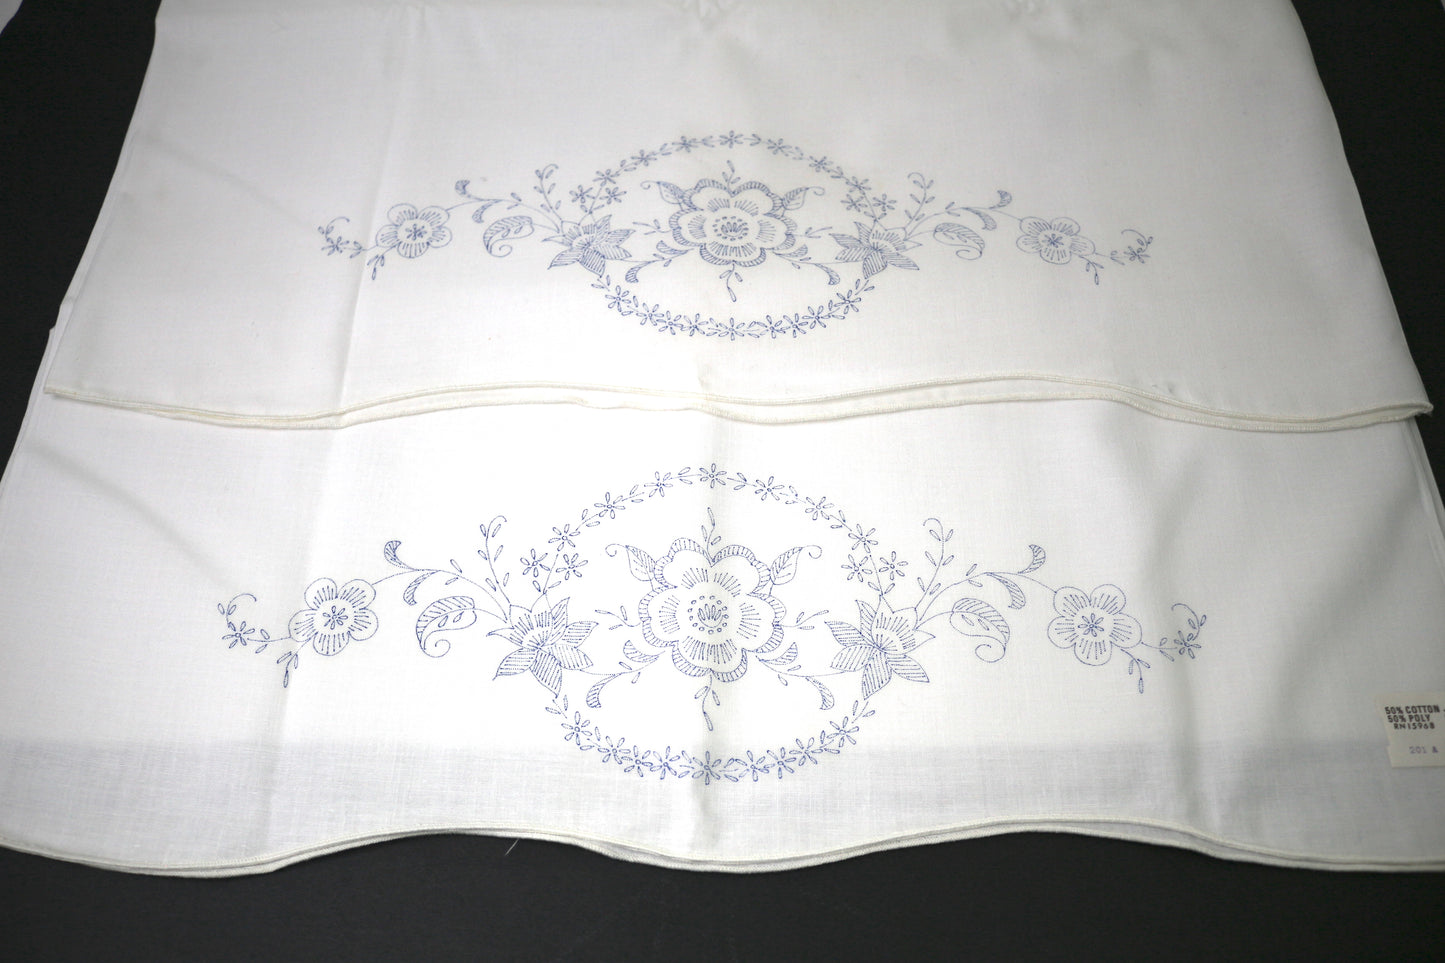 Vogarts Creative Needlework -2 Pillowcases with Embroidery Pattern